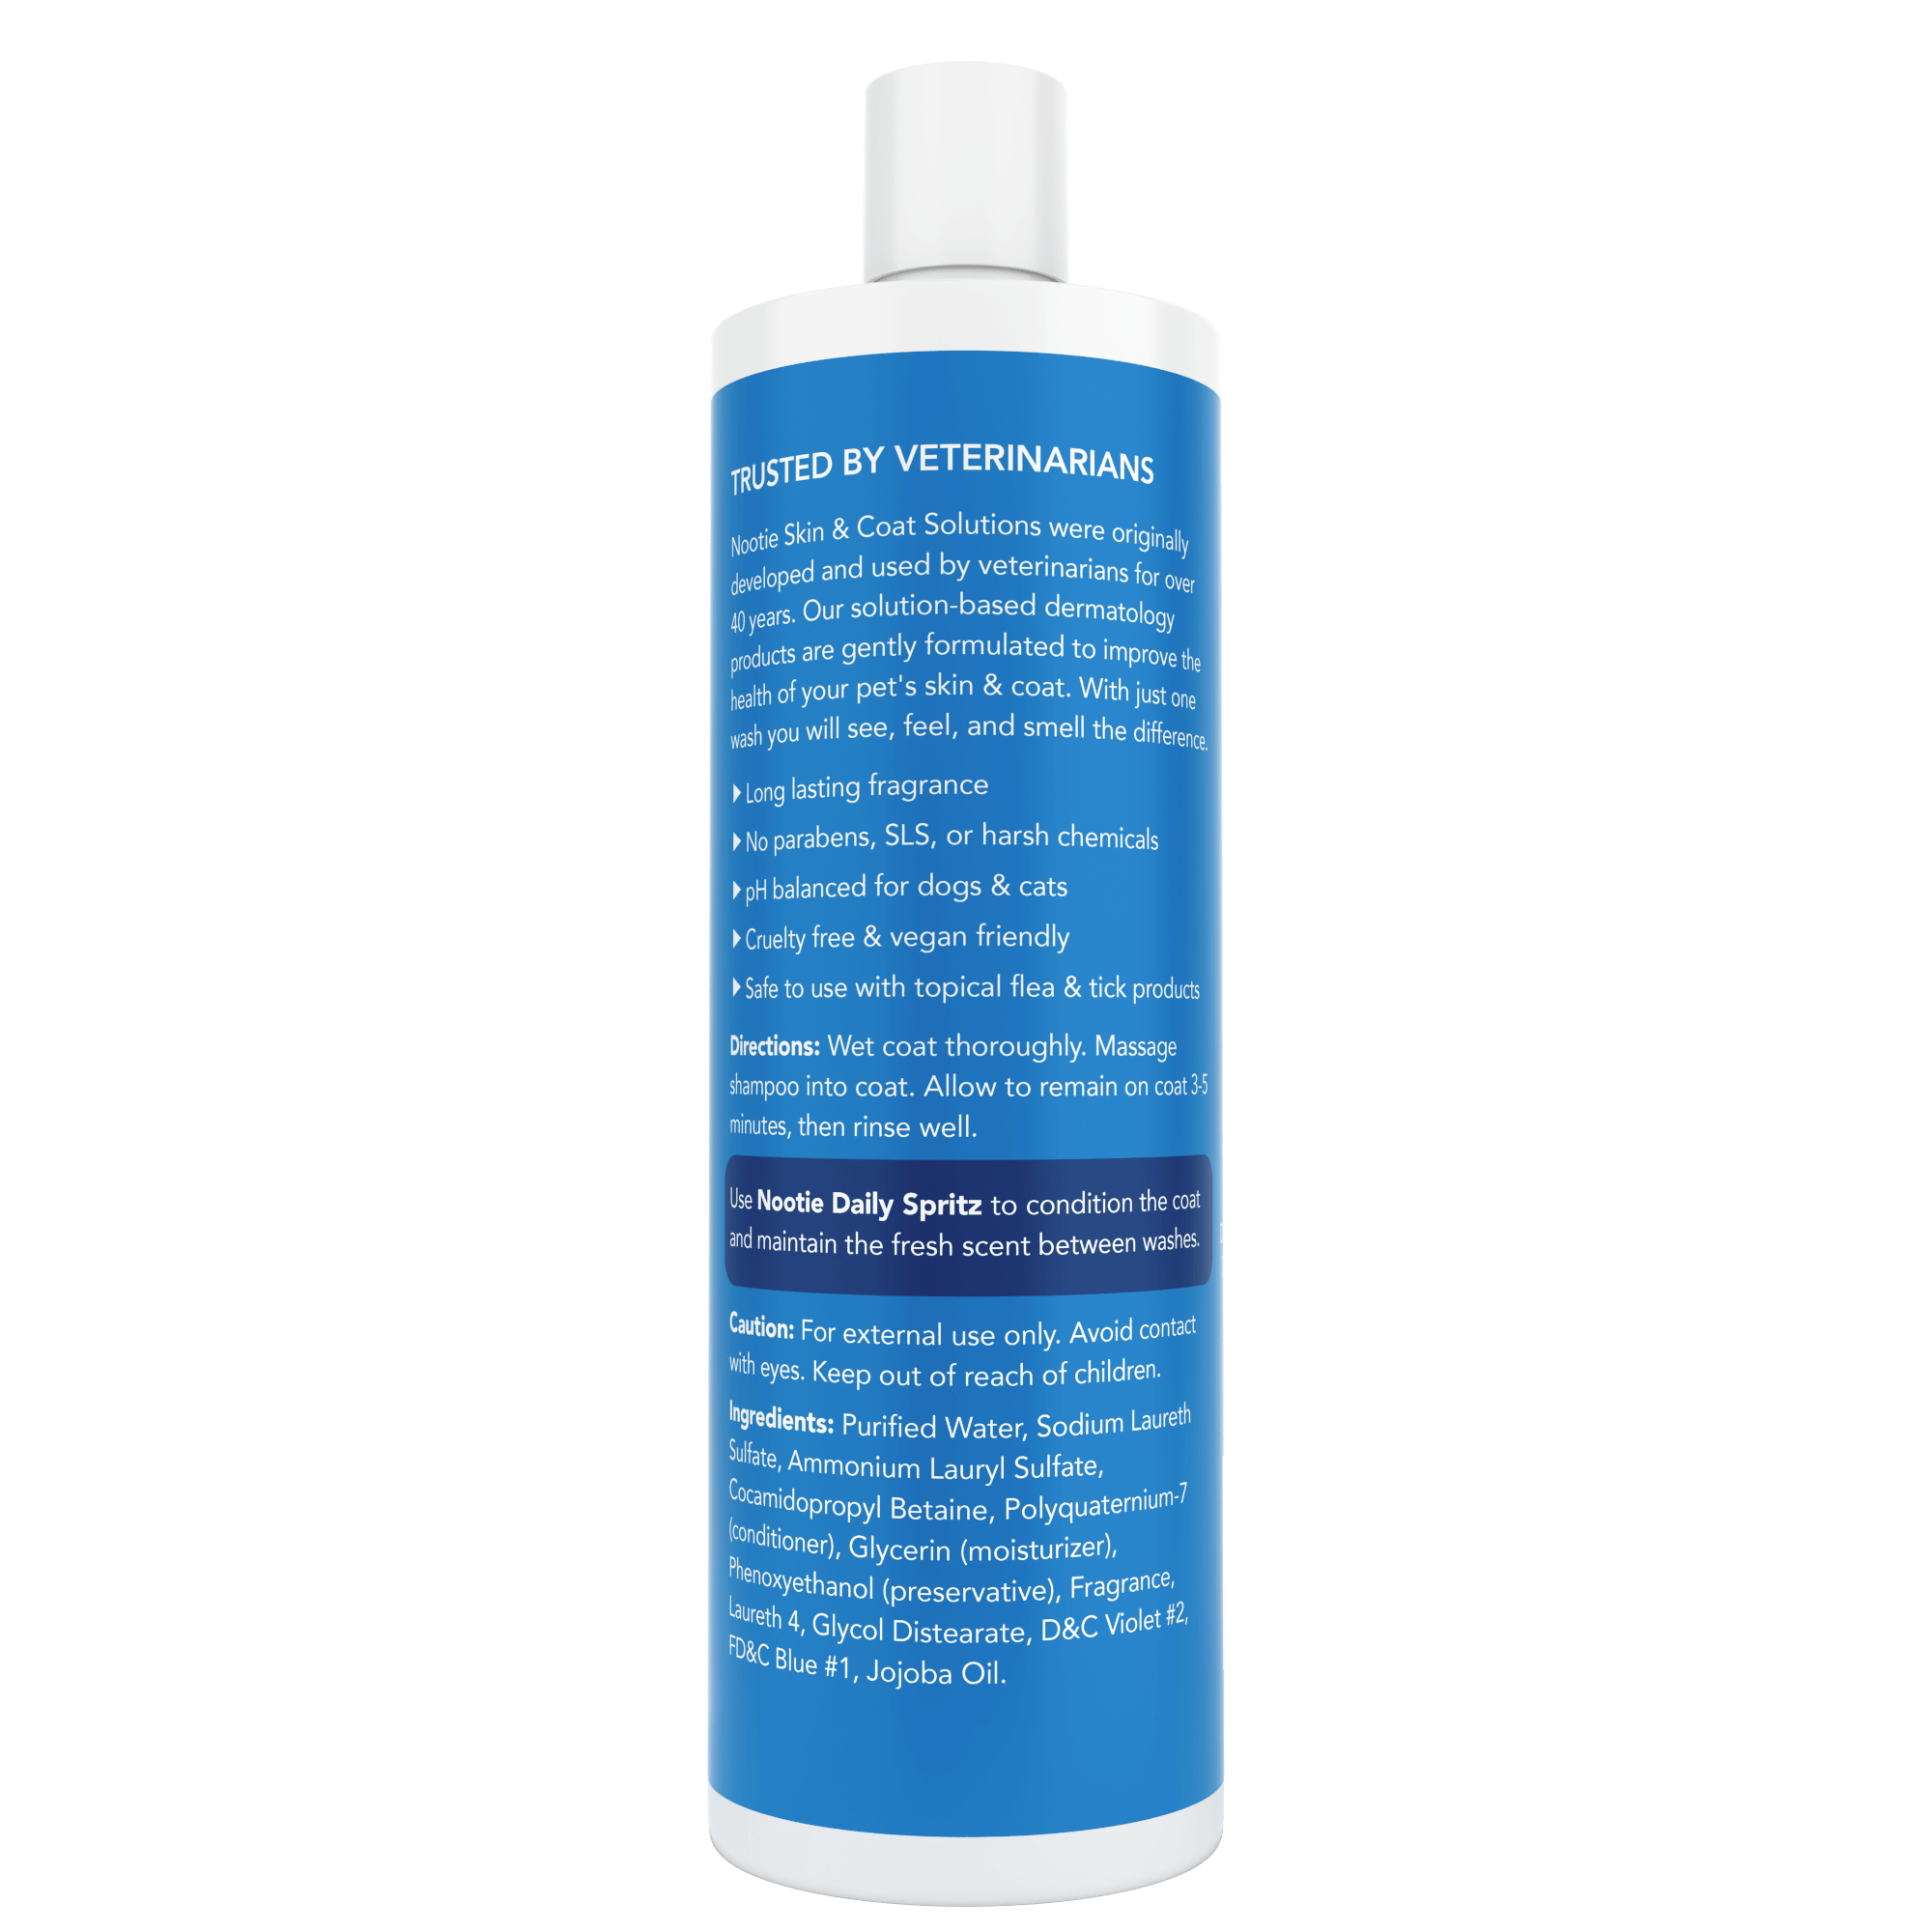 <img src="whitening shampoo.png" alt="nootie whitening dog shampoo in sweet pea and vanilla scent back of bottle">